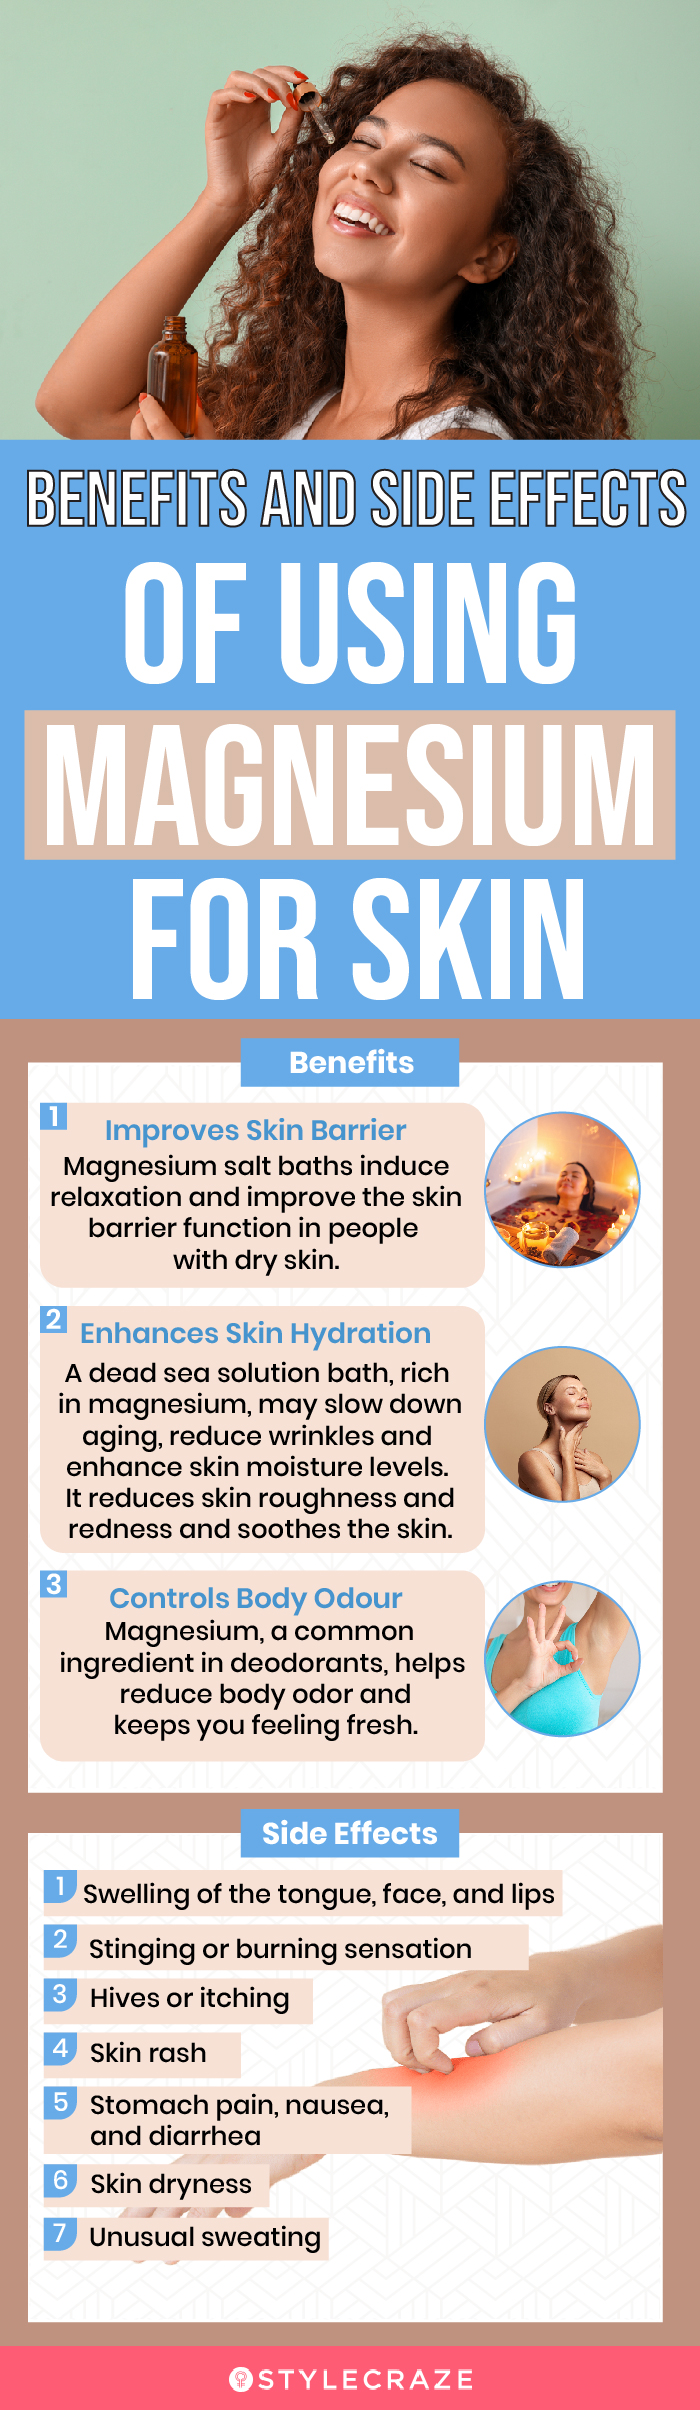 benefits and side effects of using magnesium for skin (infographic)